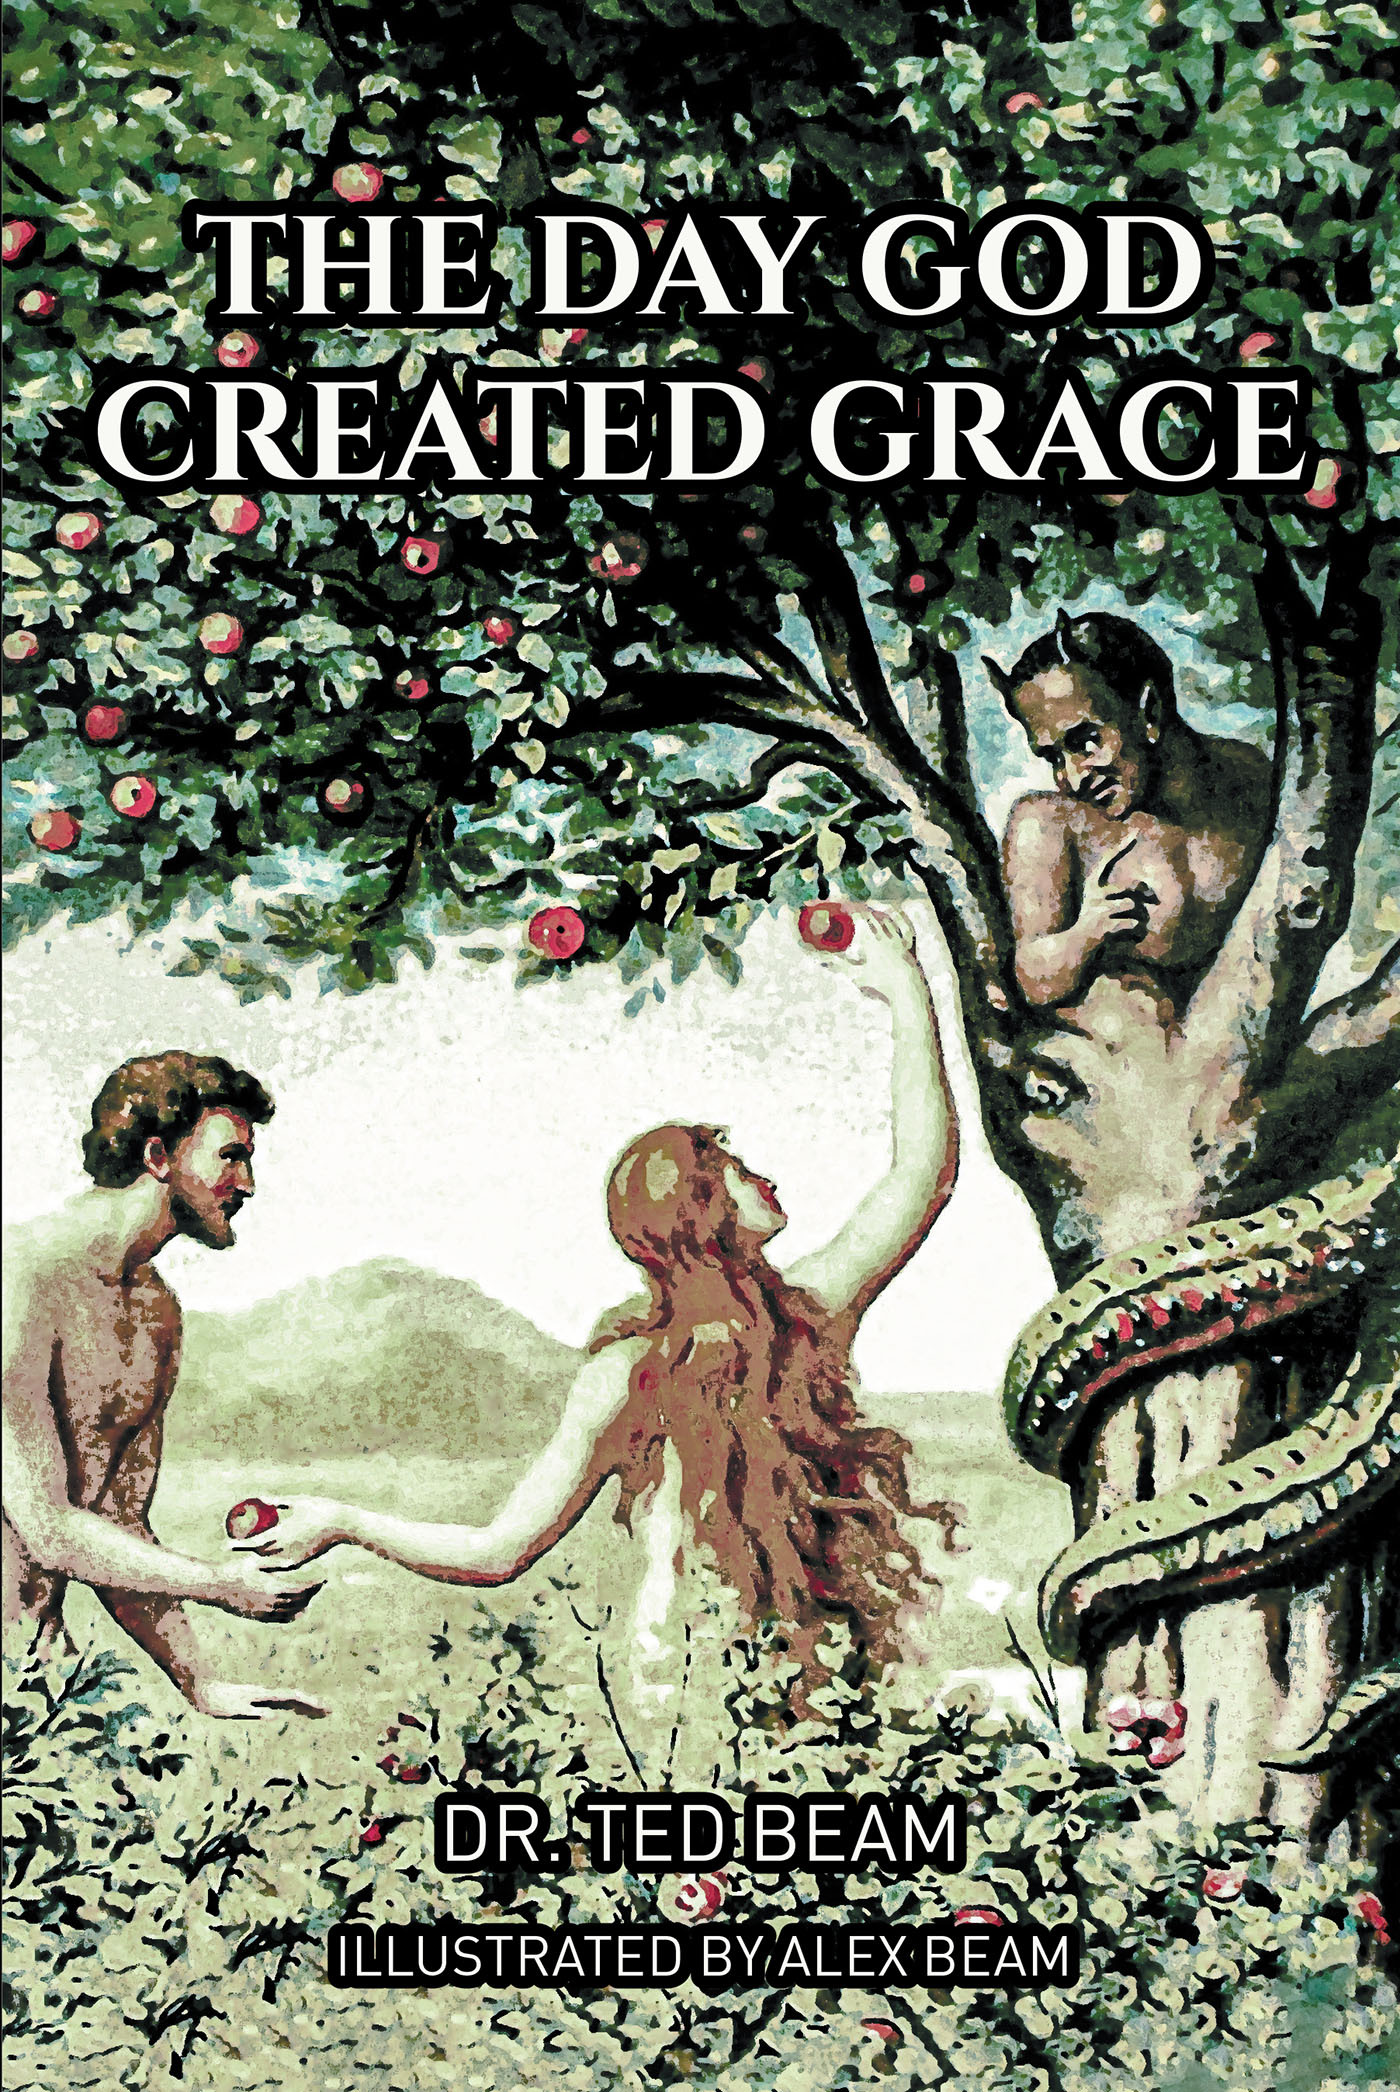 Author Dr. Ted Beam’s New Book, "The Day God Created Grace," is an Engaging Tale to Help Introduce Young Readers to the Story of Adam and Eve and God's Unending Love